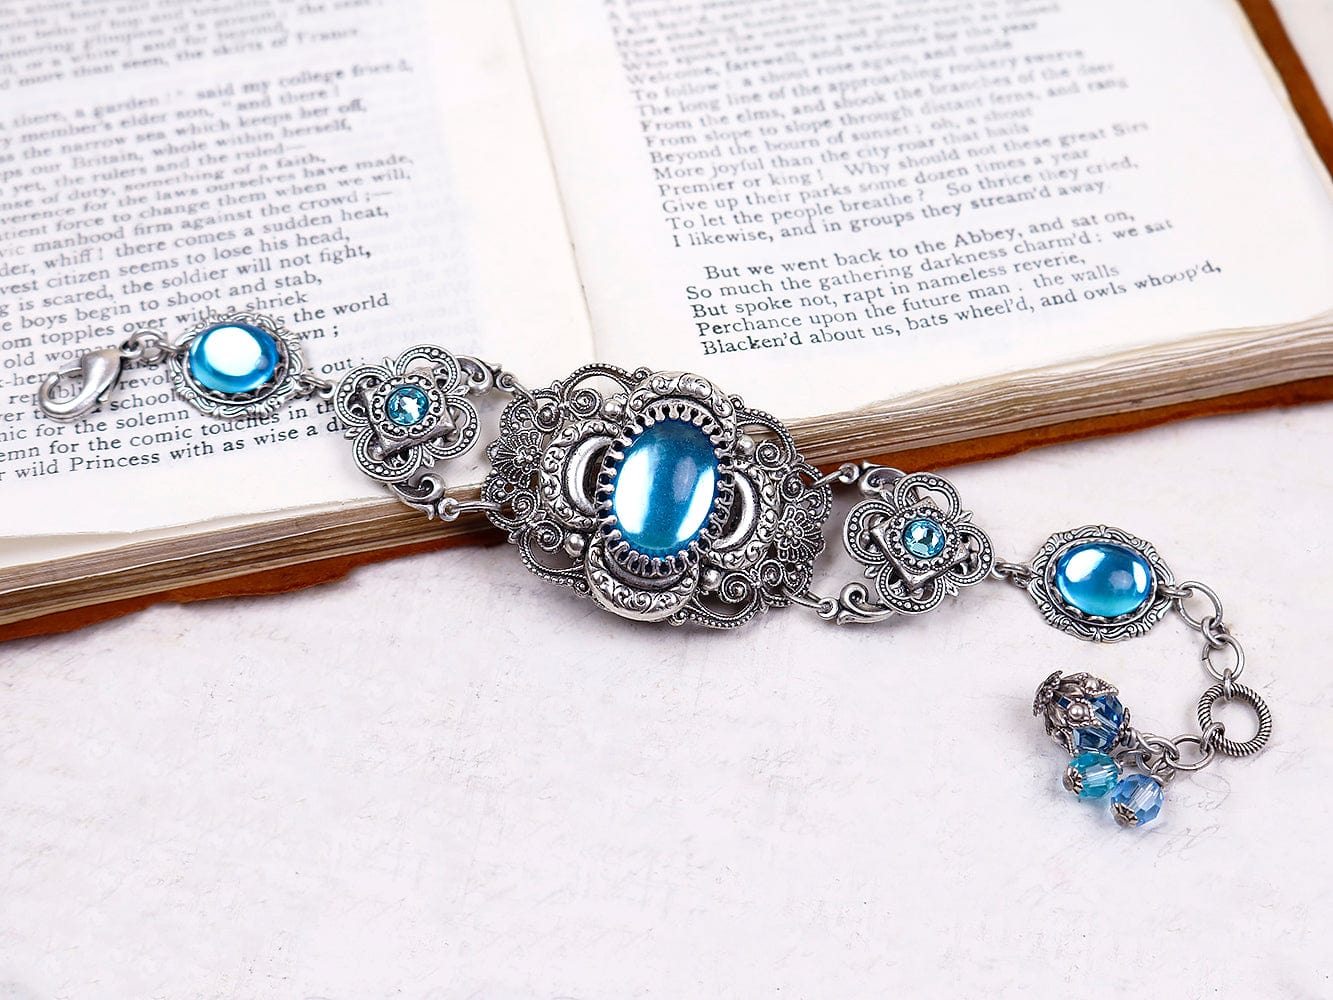 Canterbury Bracelet in Aqua and Antiqued Silver by Rabbitwood and Reason